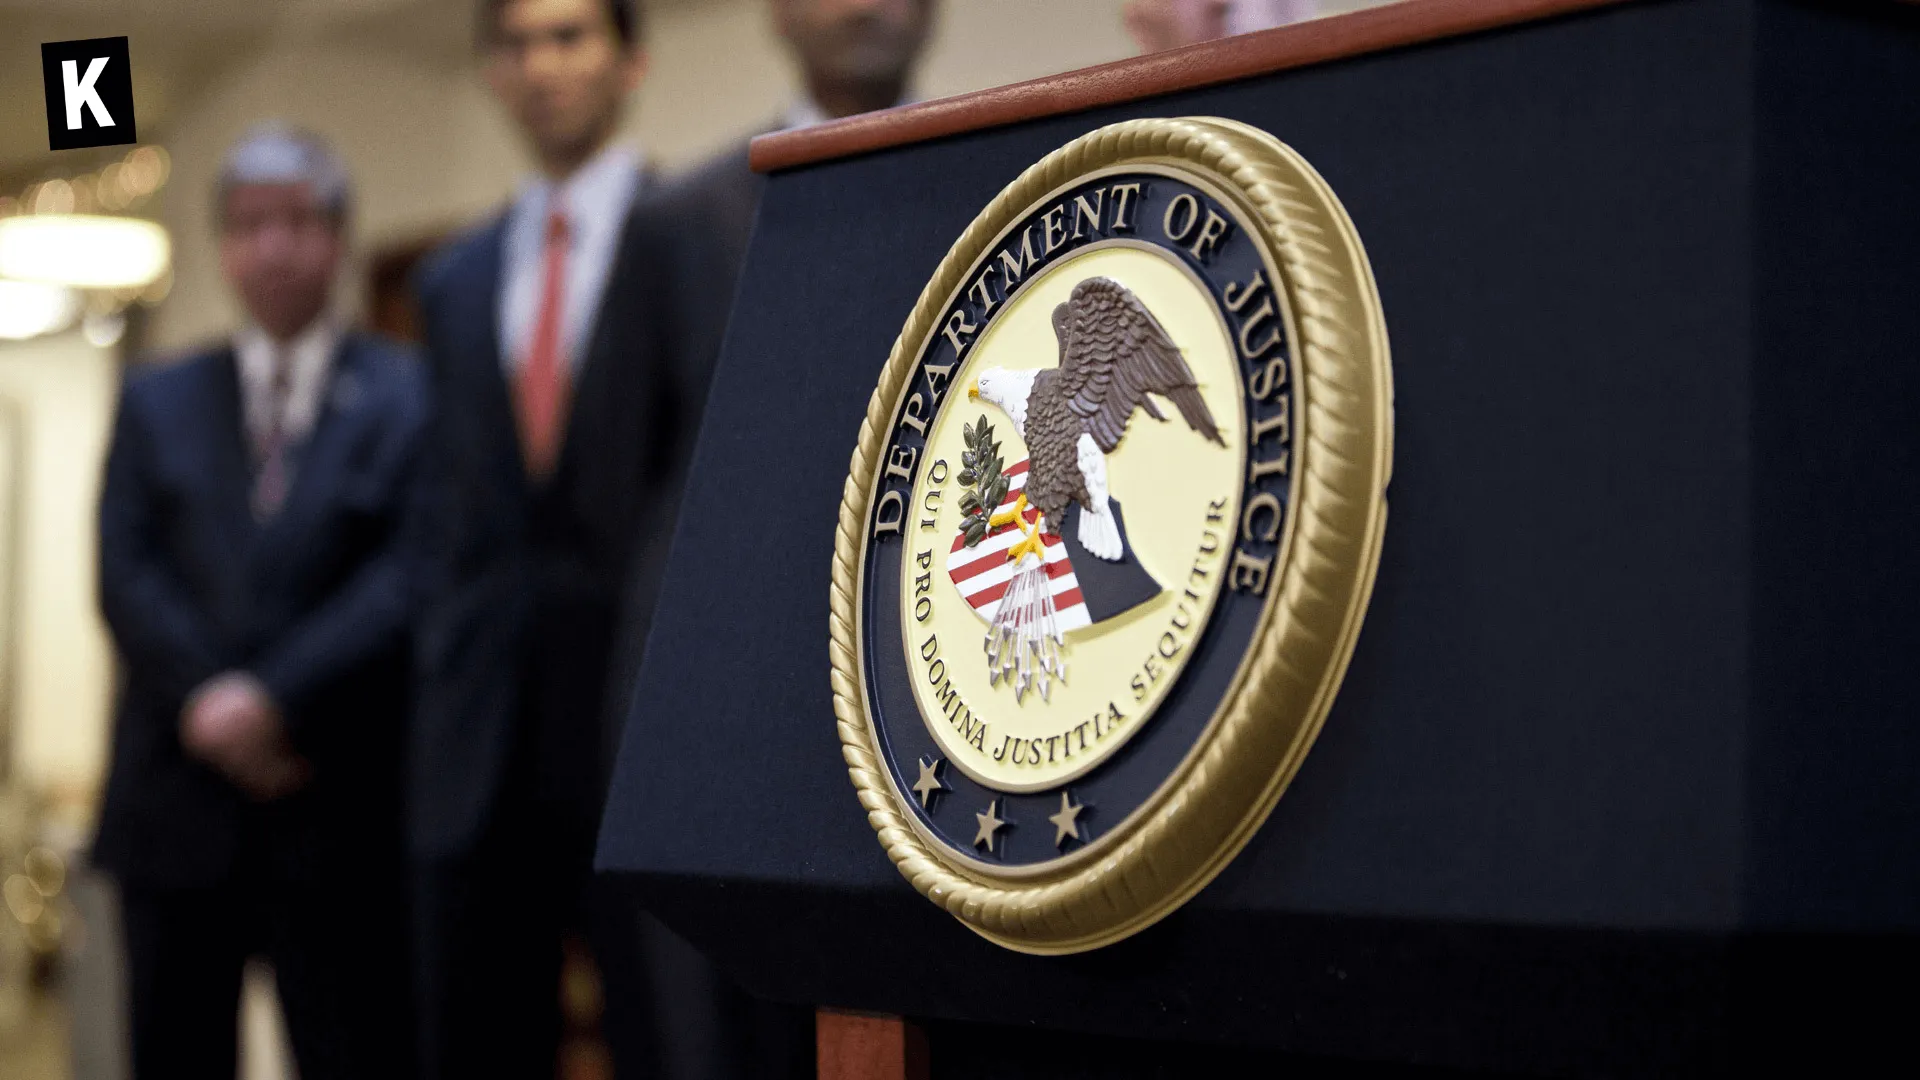 Seal of the U.S. Department of Justice on a lectern with officials in the background